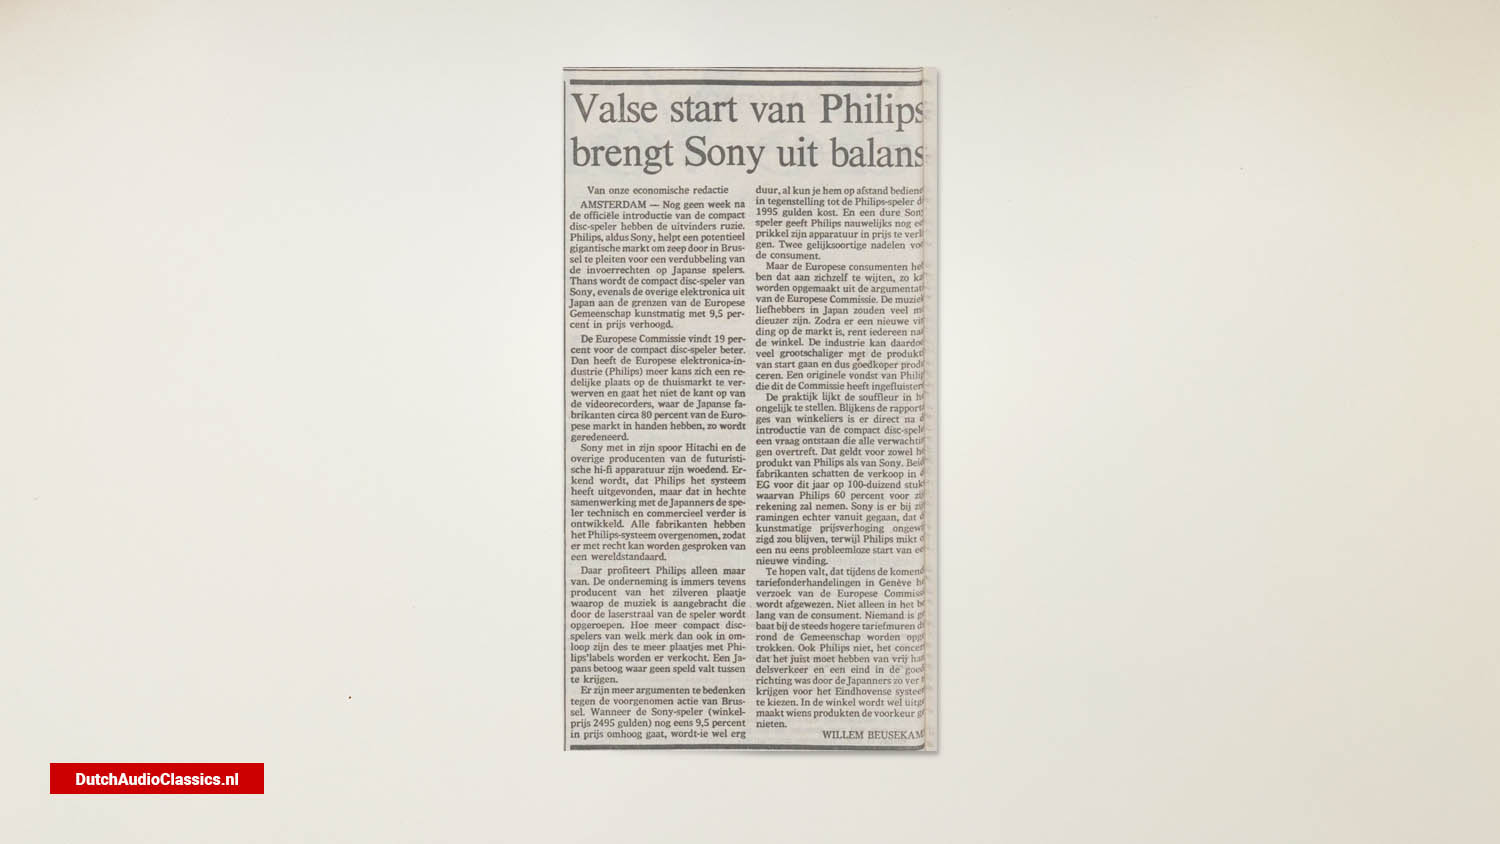 newspaper article Philips' false start throws Sony off balance